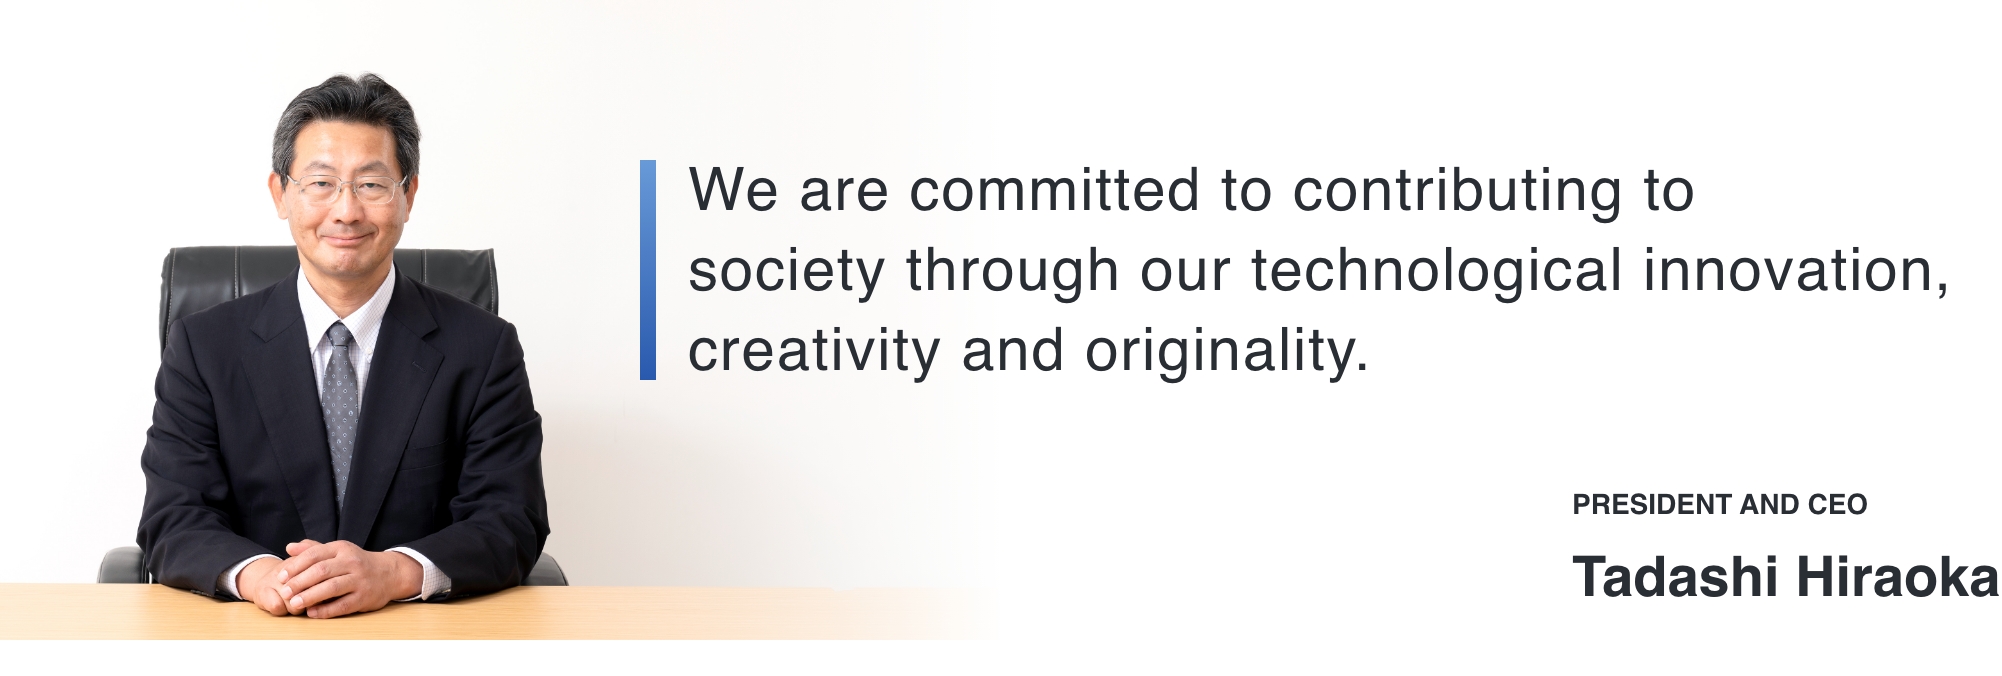 We are committed to contributing to society through our technological innovation, creativity and originality. PRESIDENT AND CEO Tadashi Hiraoka